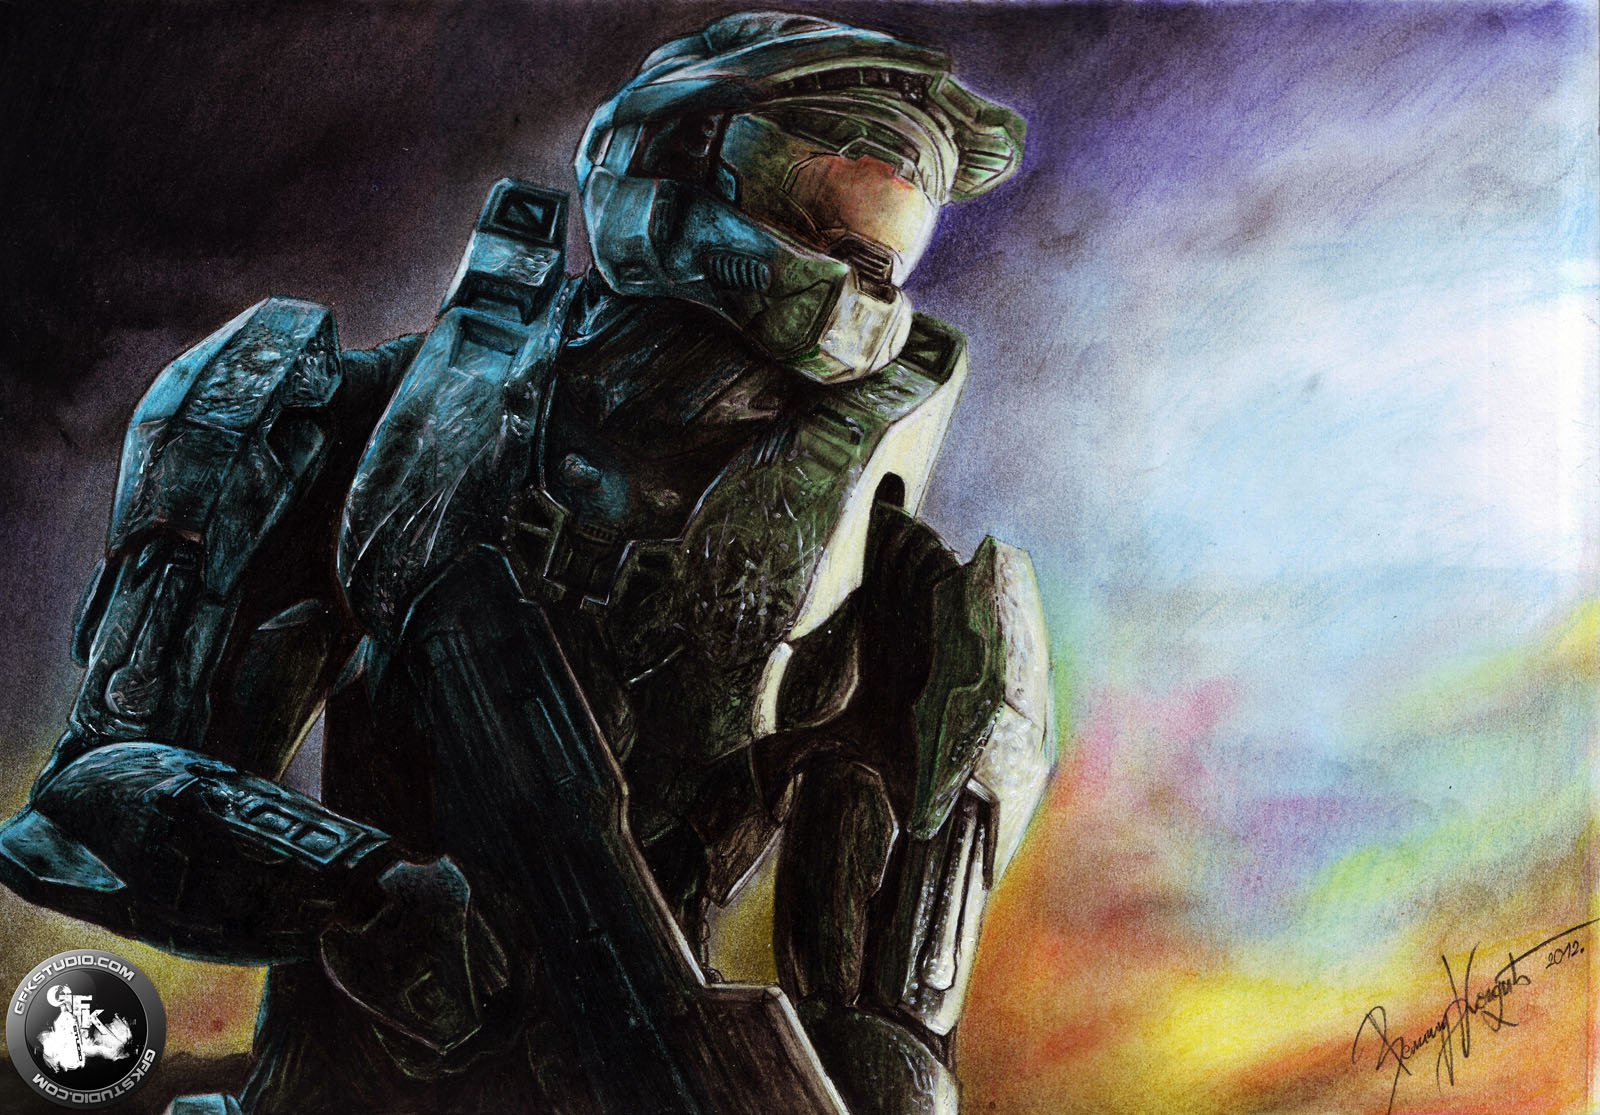 after 18 Months of Game Art HQ, the popular Master Chief main protagonist f...